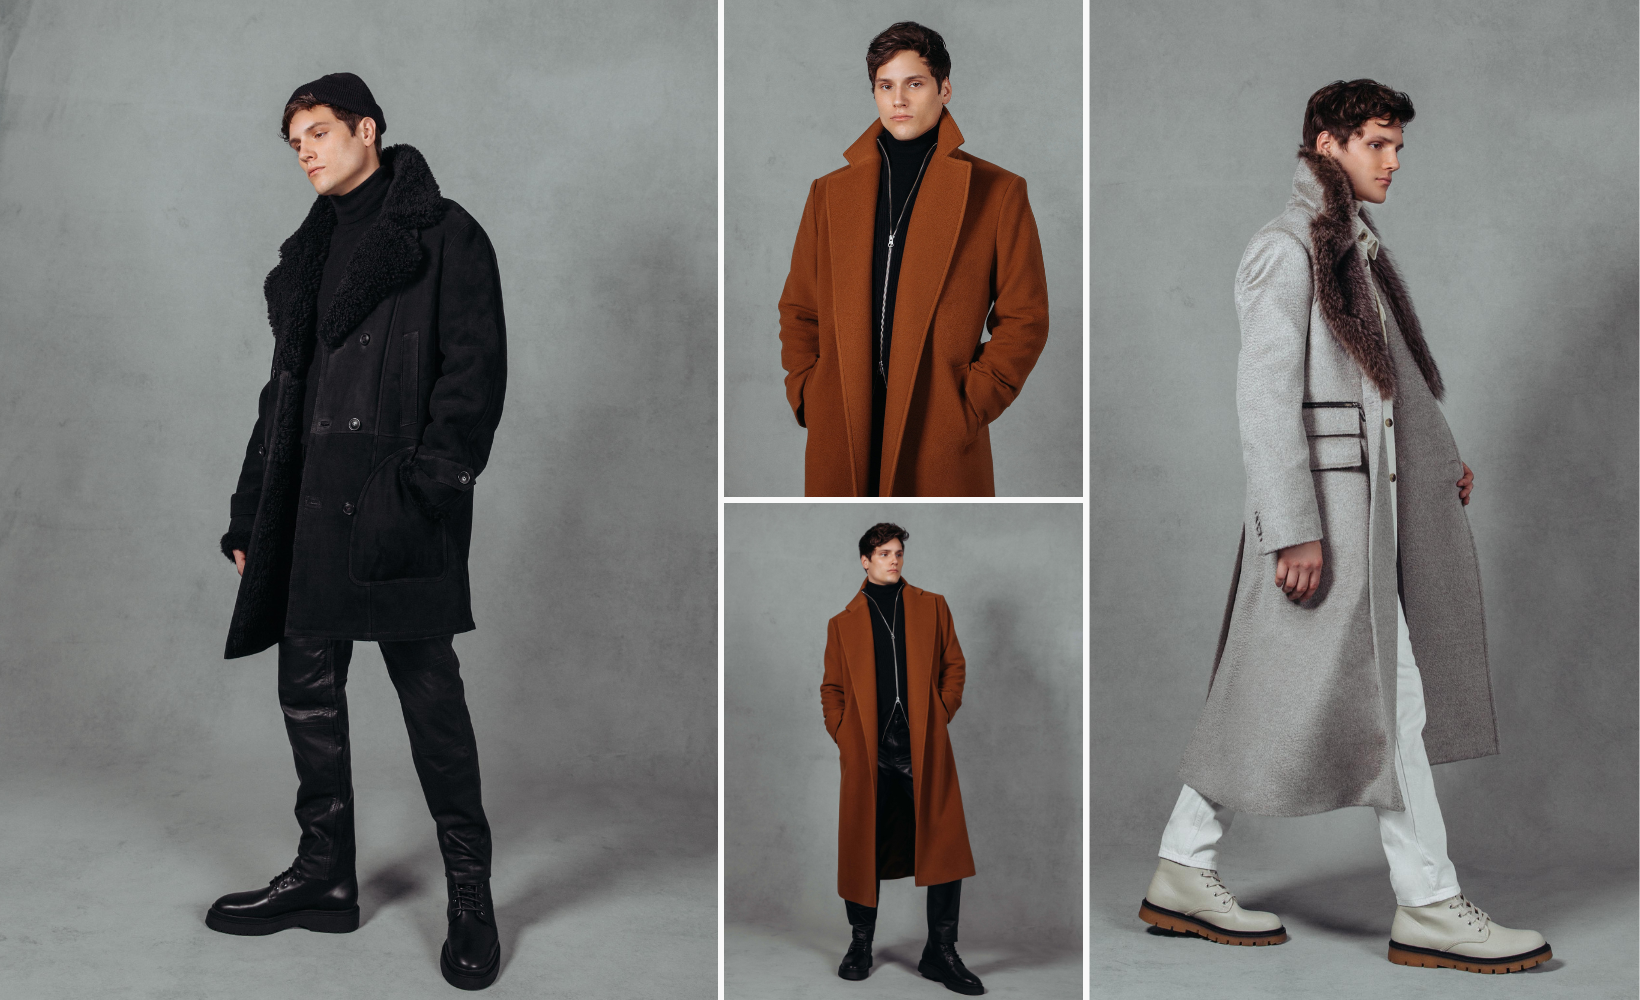 From left to right; Foster: This contemporary reversible button-front Toscana shearling coat offers stylish warmth. 35" long. Oversized spread collar. Comfortable fit in the shoulders and chest, straight cut through the torso when worn wool in. Looser fit in the shoulders, chest and torso when worn wool out. 5962: Cognac. Wool. Single Breasted, Notch Collar with Welt Pockets 50 inch length. 5960: ALPACA SILVER WITH RACCOON. Wool. Double Breasted, Raccoon Notch Collar and 3 Flap Pockets 50 inch length.